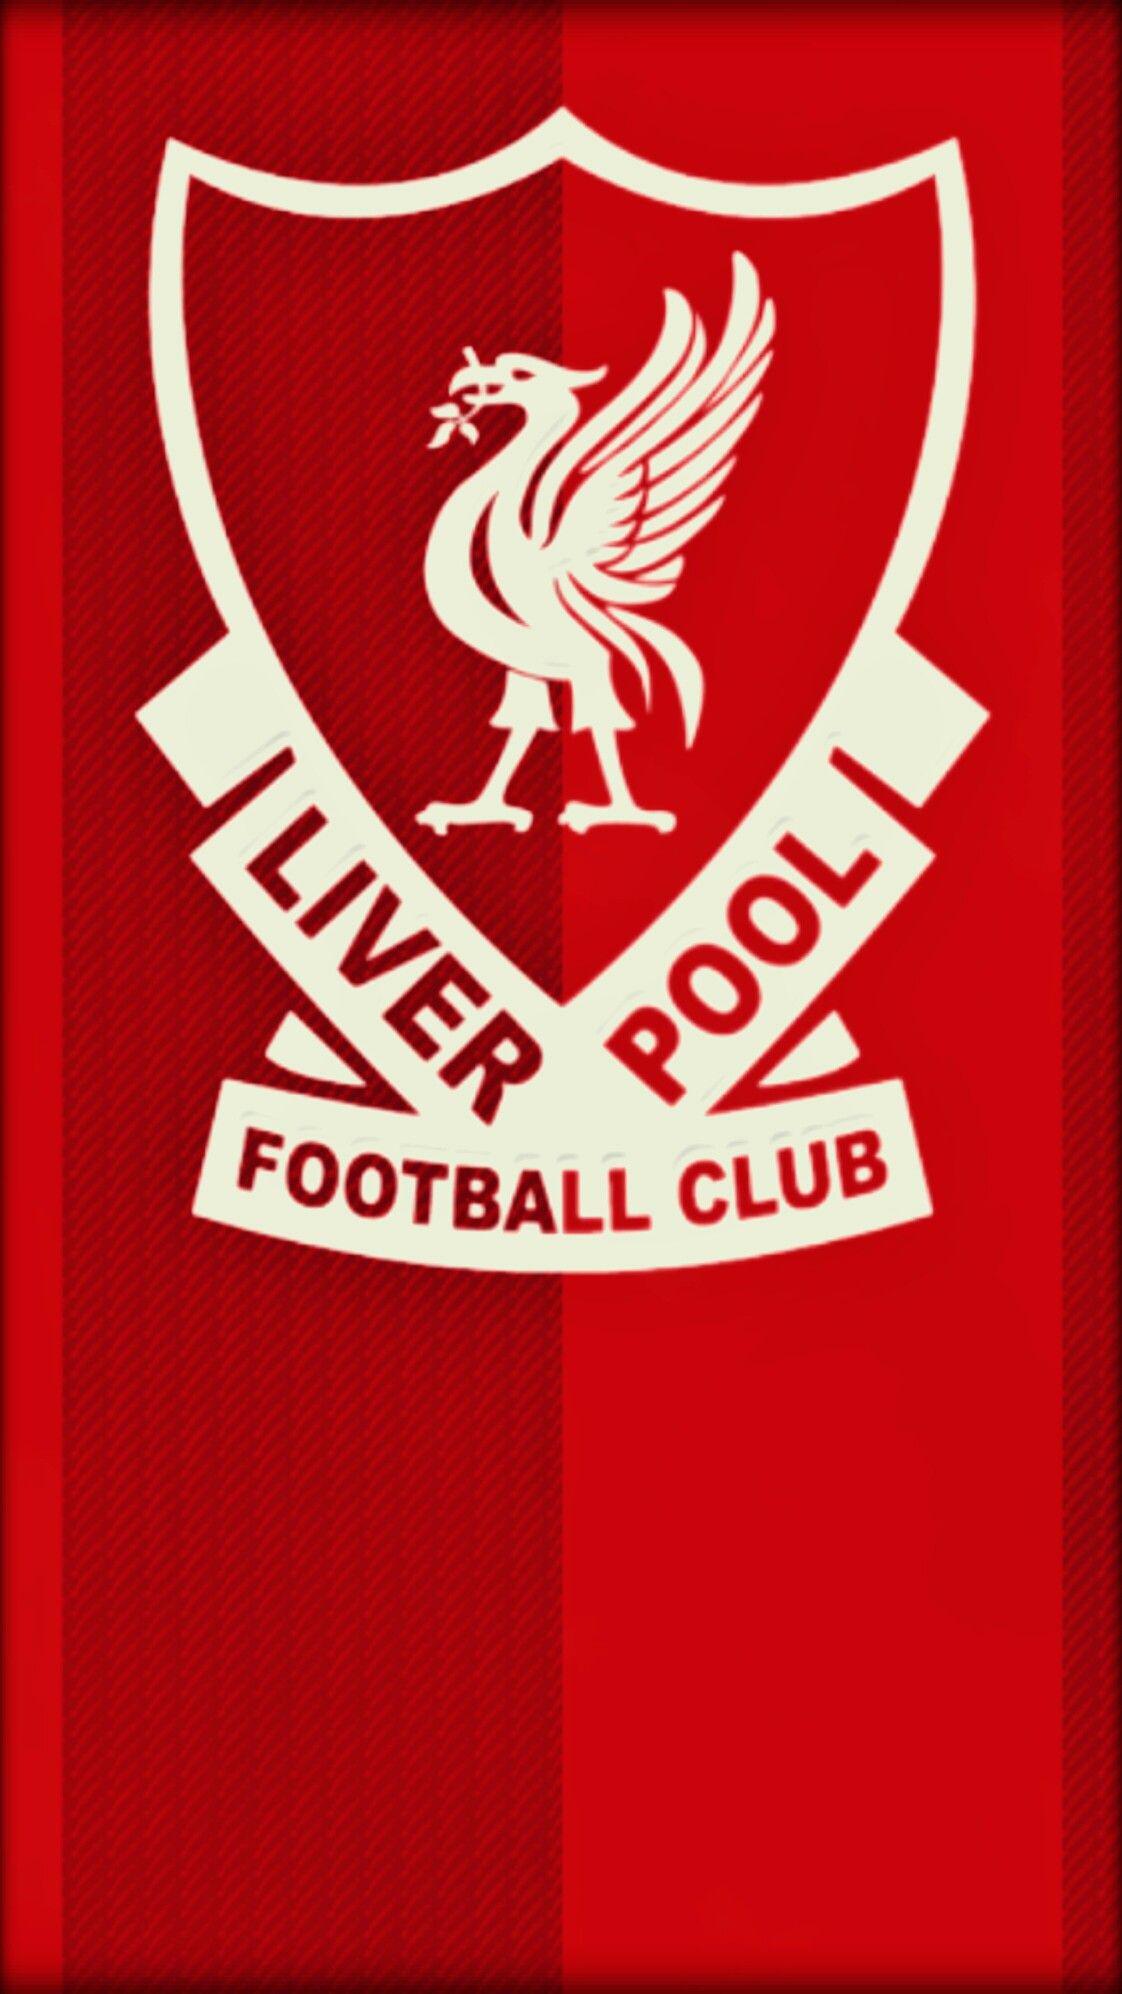 Do You Want To Know About Soccer? Read This. Liverpool fc